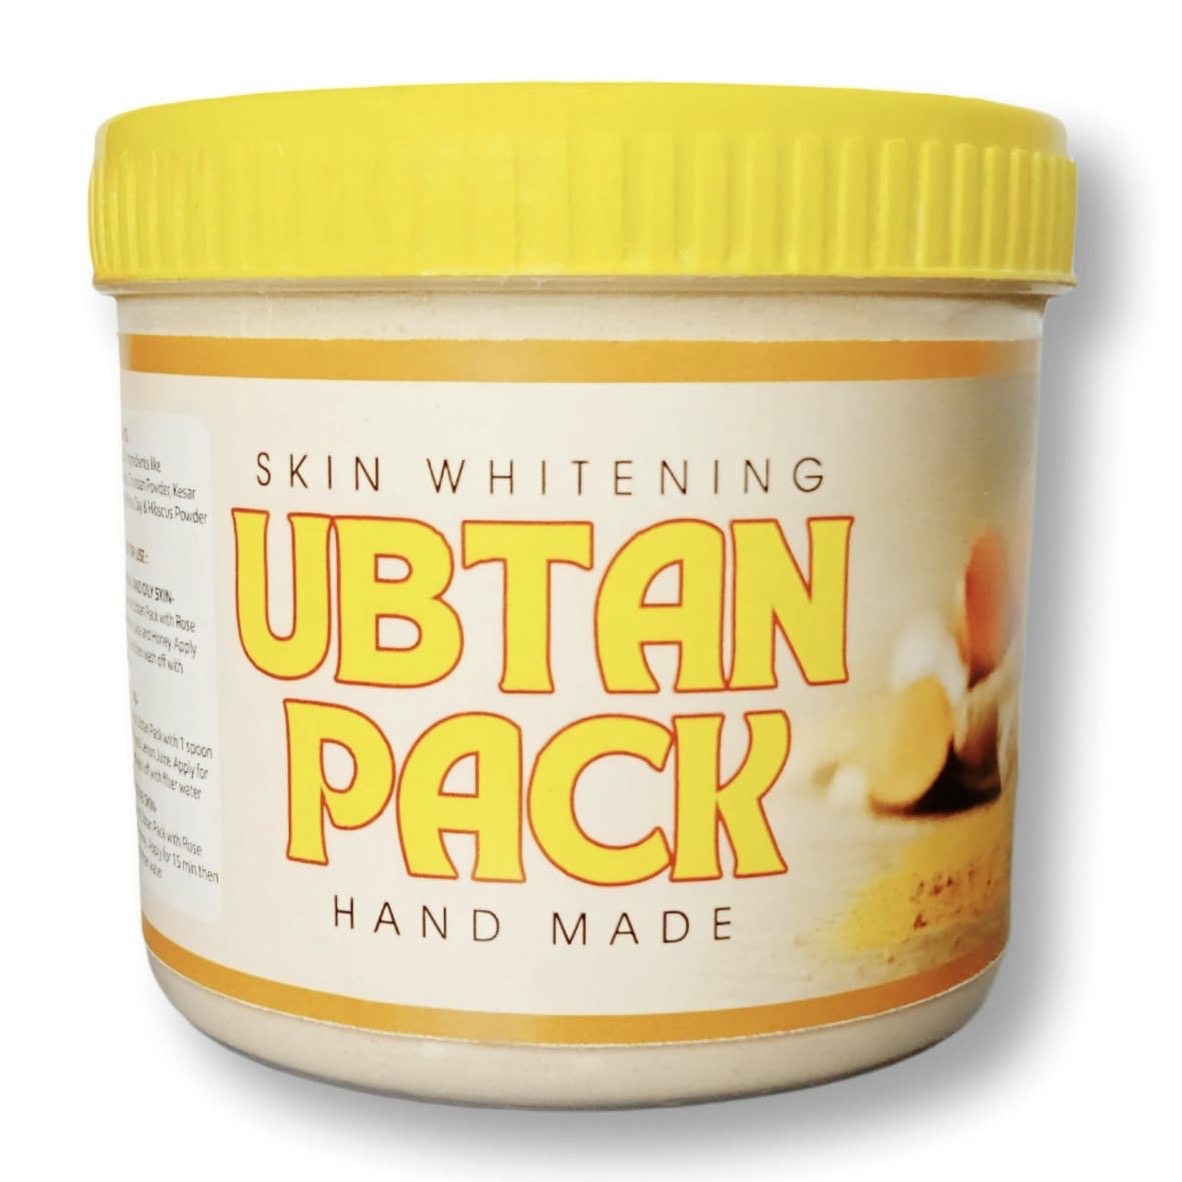 UBTAN PACK For Skin Whitening and Cleansing